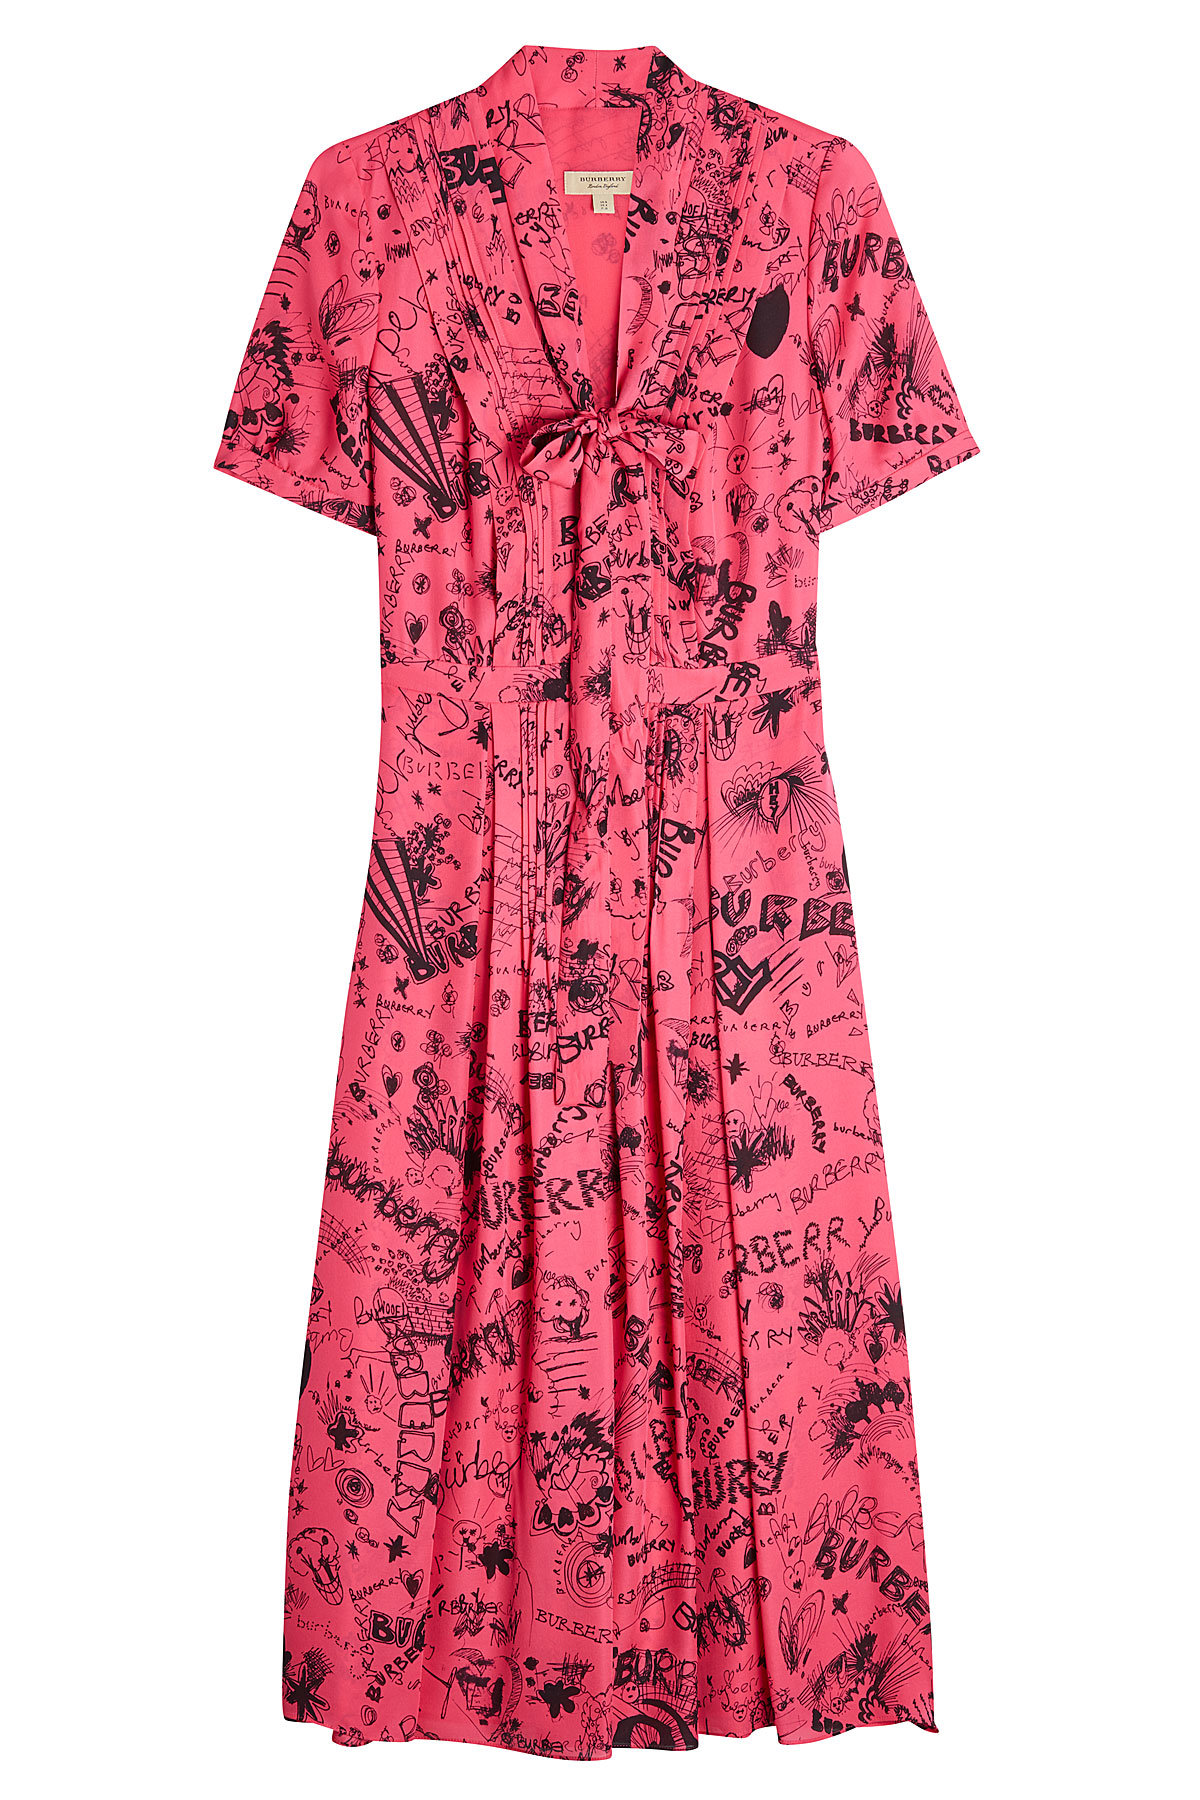 Antoniana Doodle Dress in Mulberry Silk by Burberry